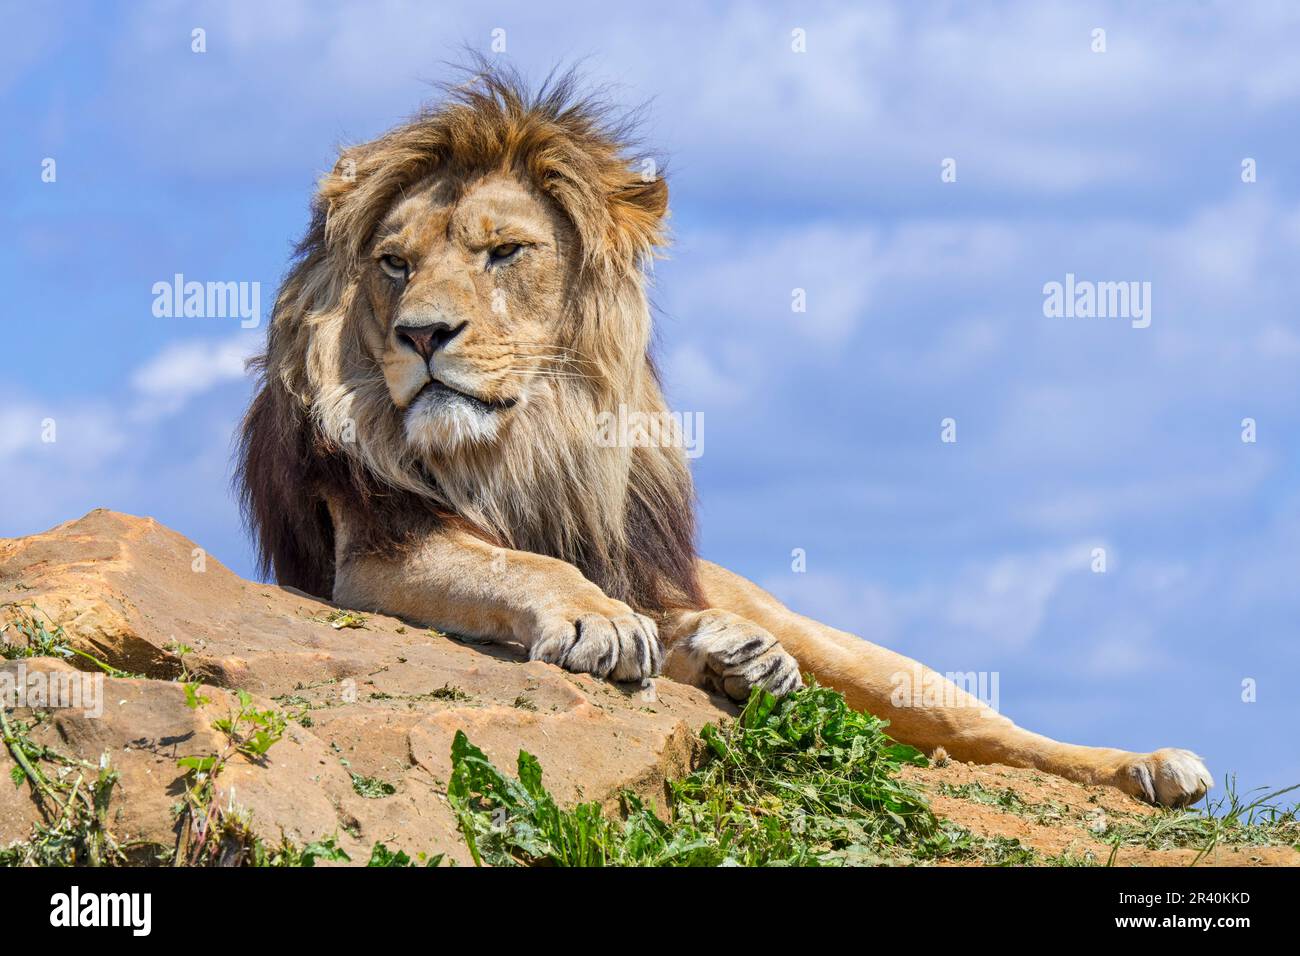 African lion (Panthera leo) adult male resting on rock against blue cloudy sky Stock Photo